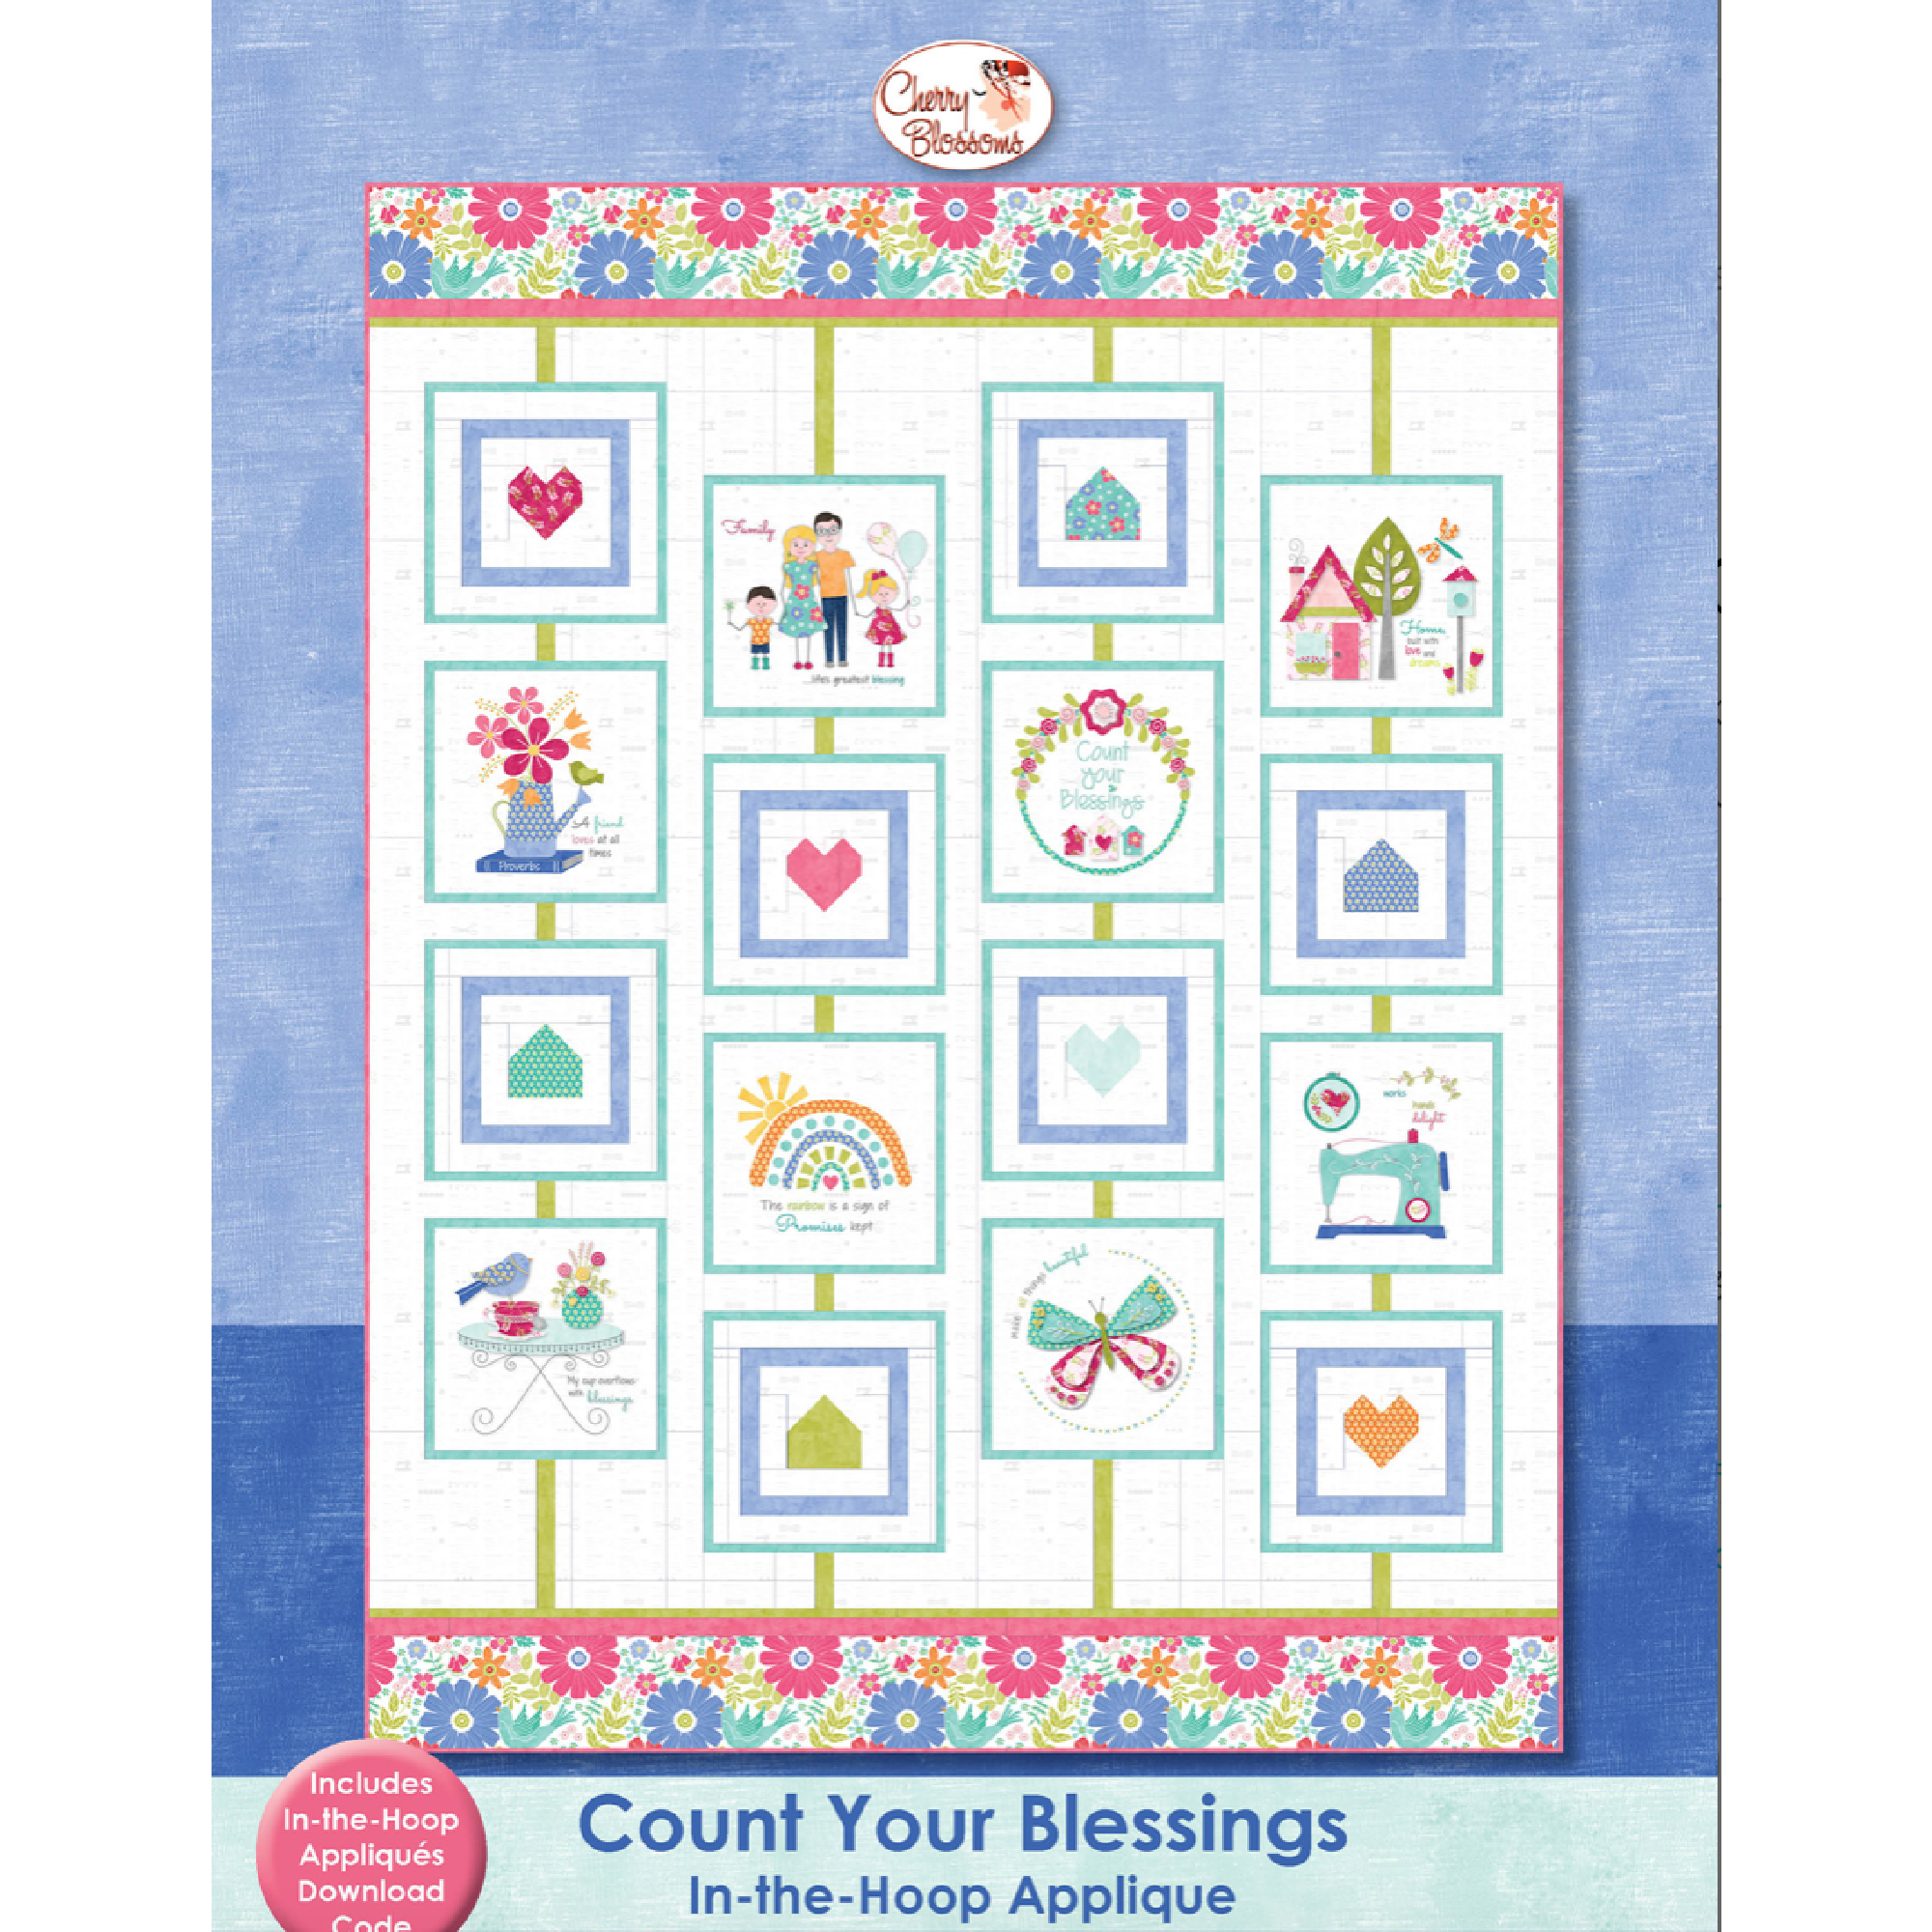 COUNT YOUR BLESSINGS PATTERN SET